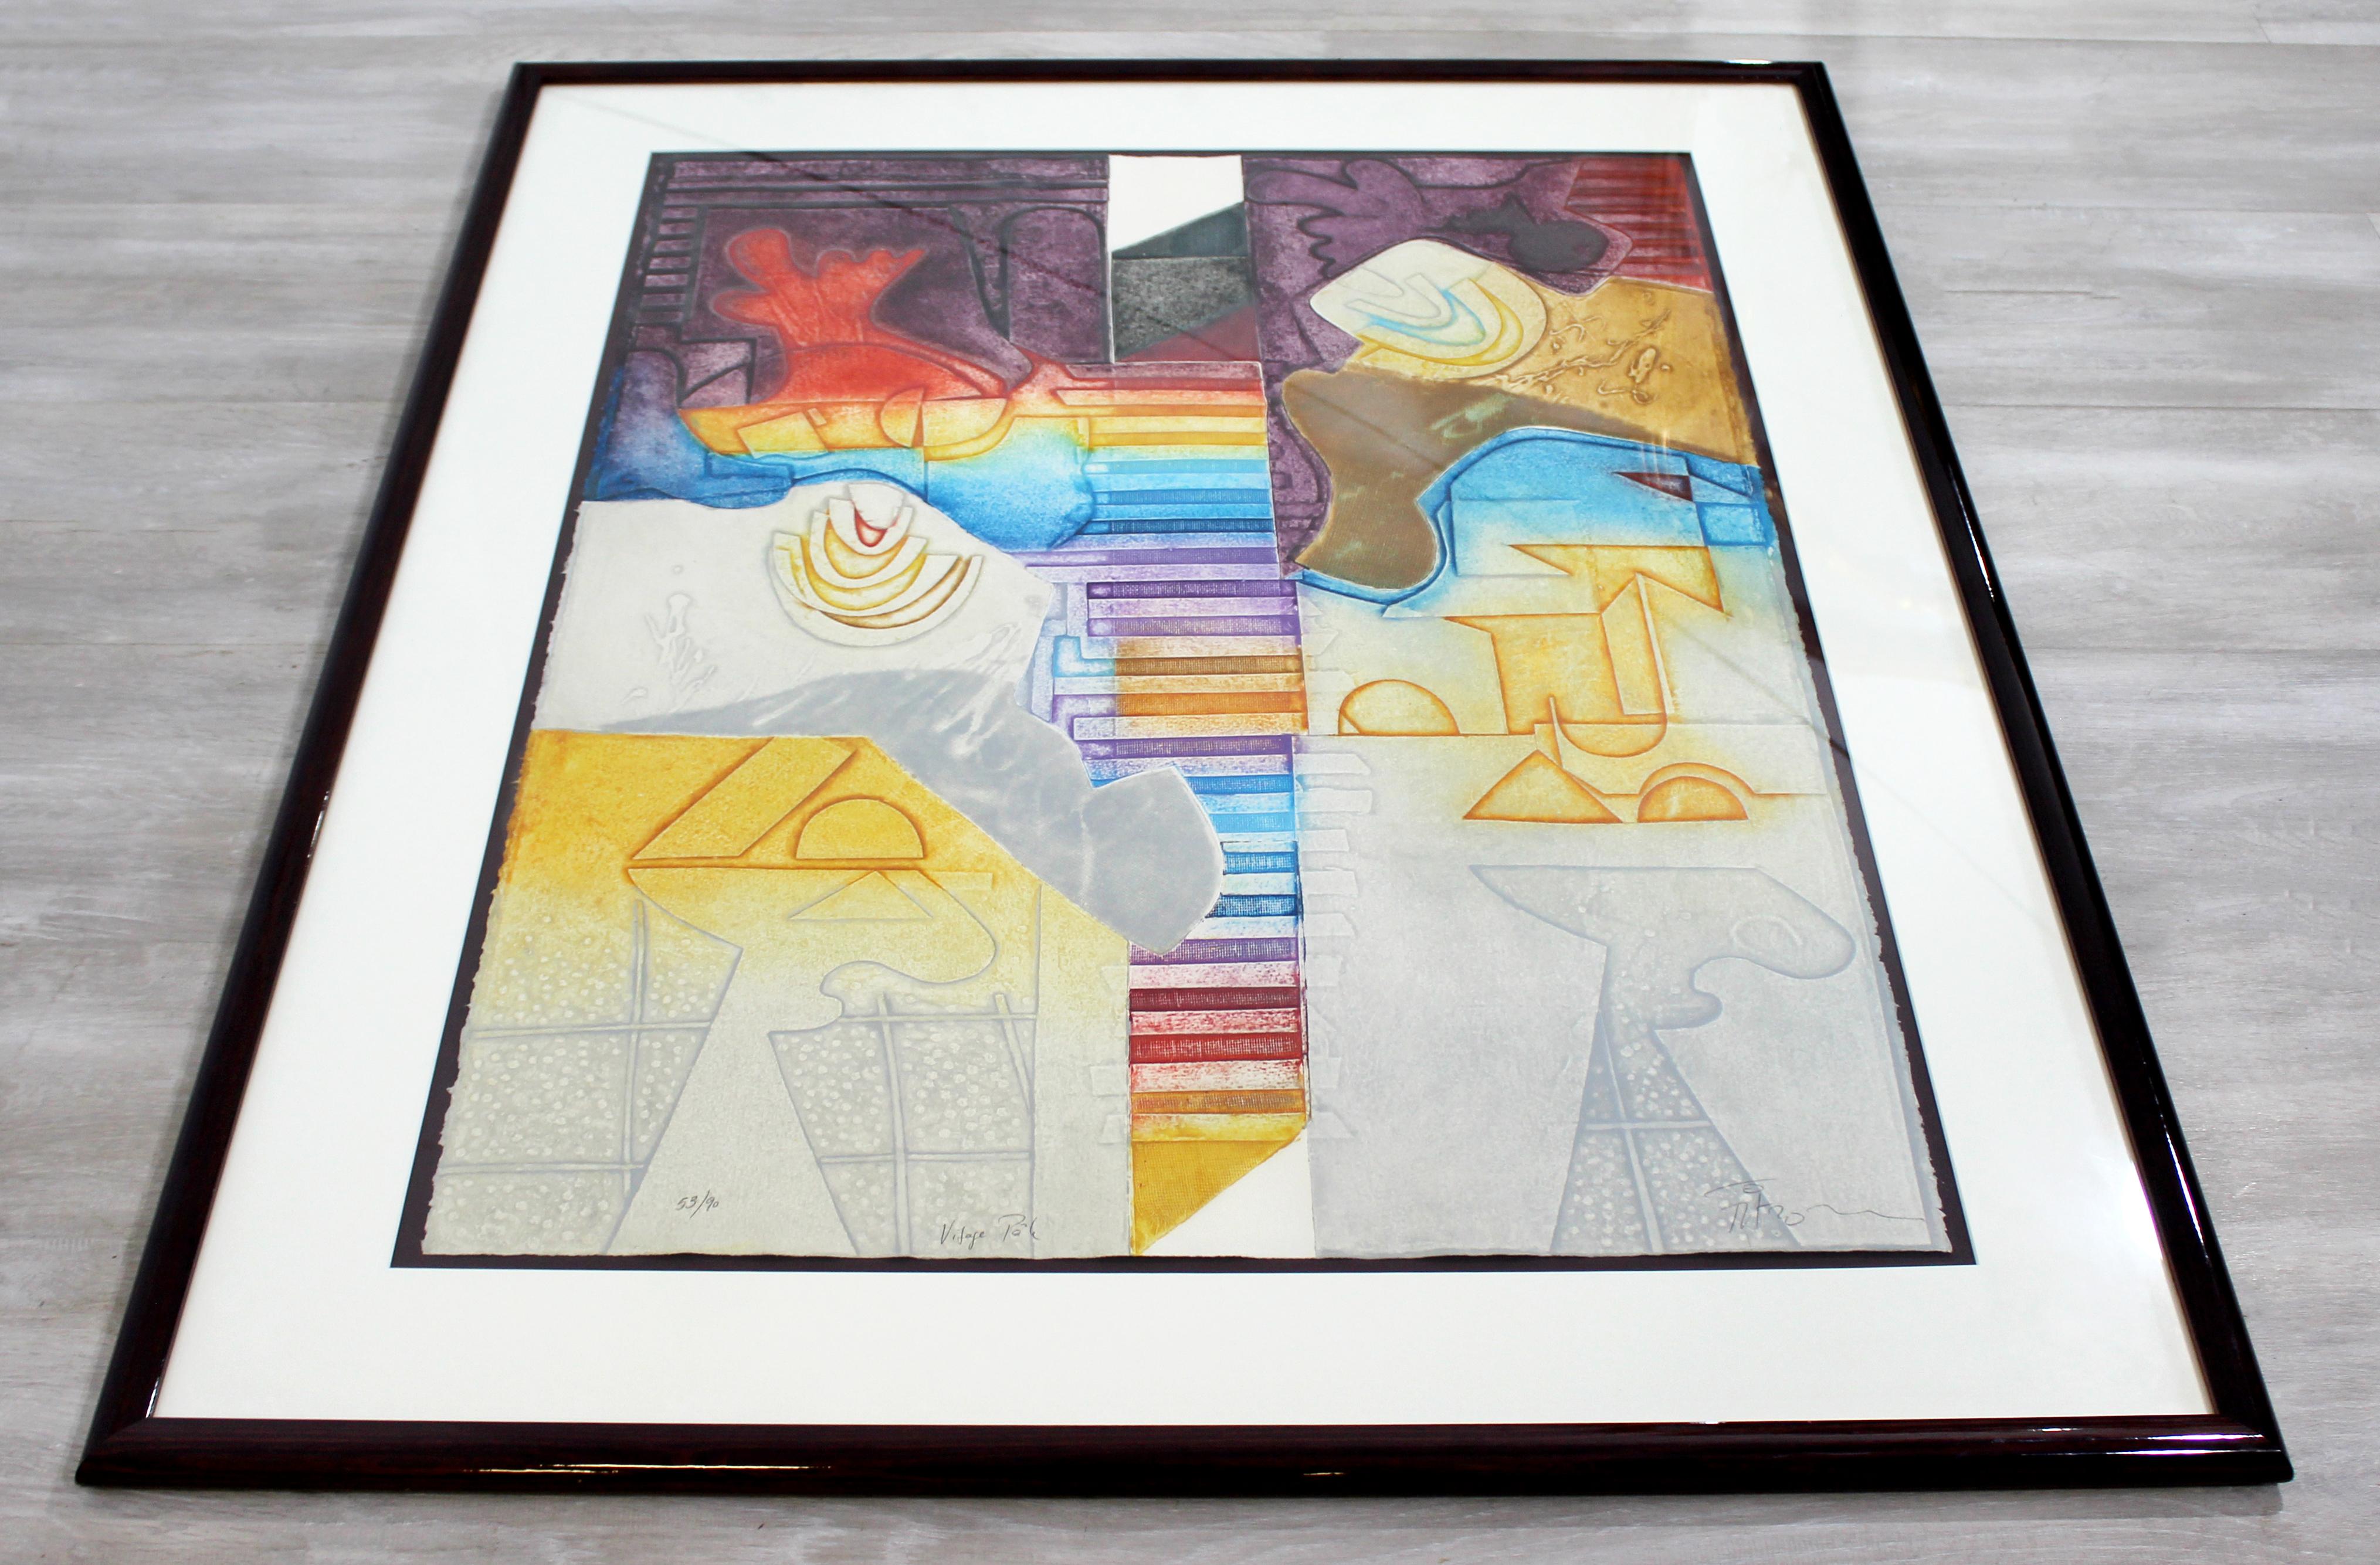 Late 20th Century Mid-Century Modern Framed Embossed Etching Signed Gerard Fitremann 53/90, 1980s